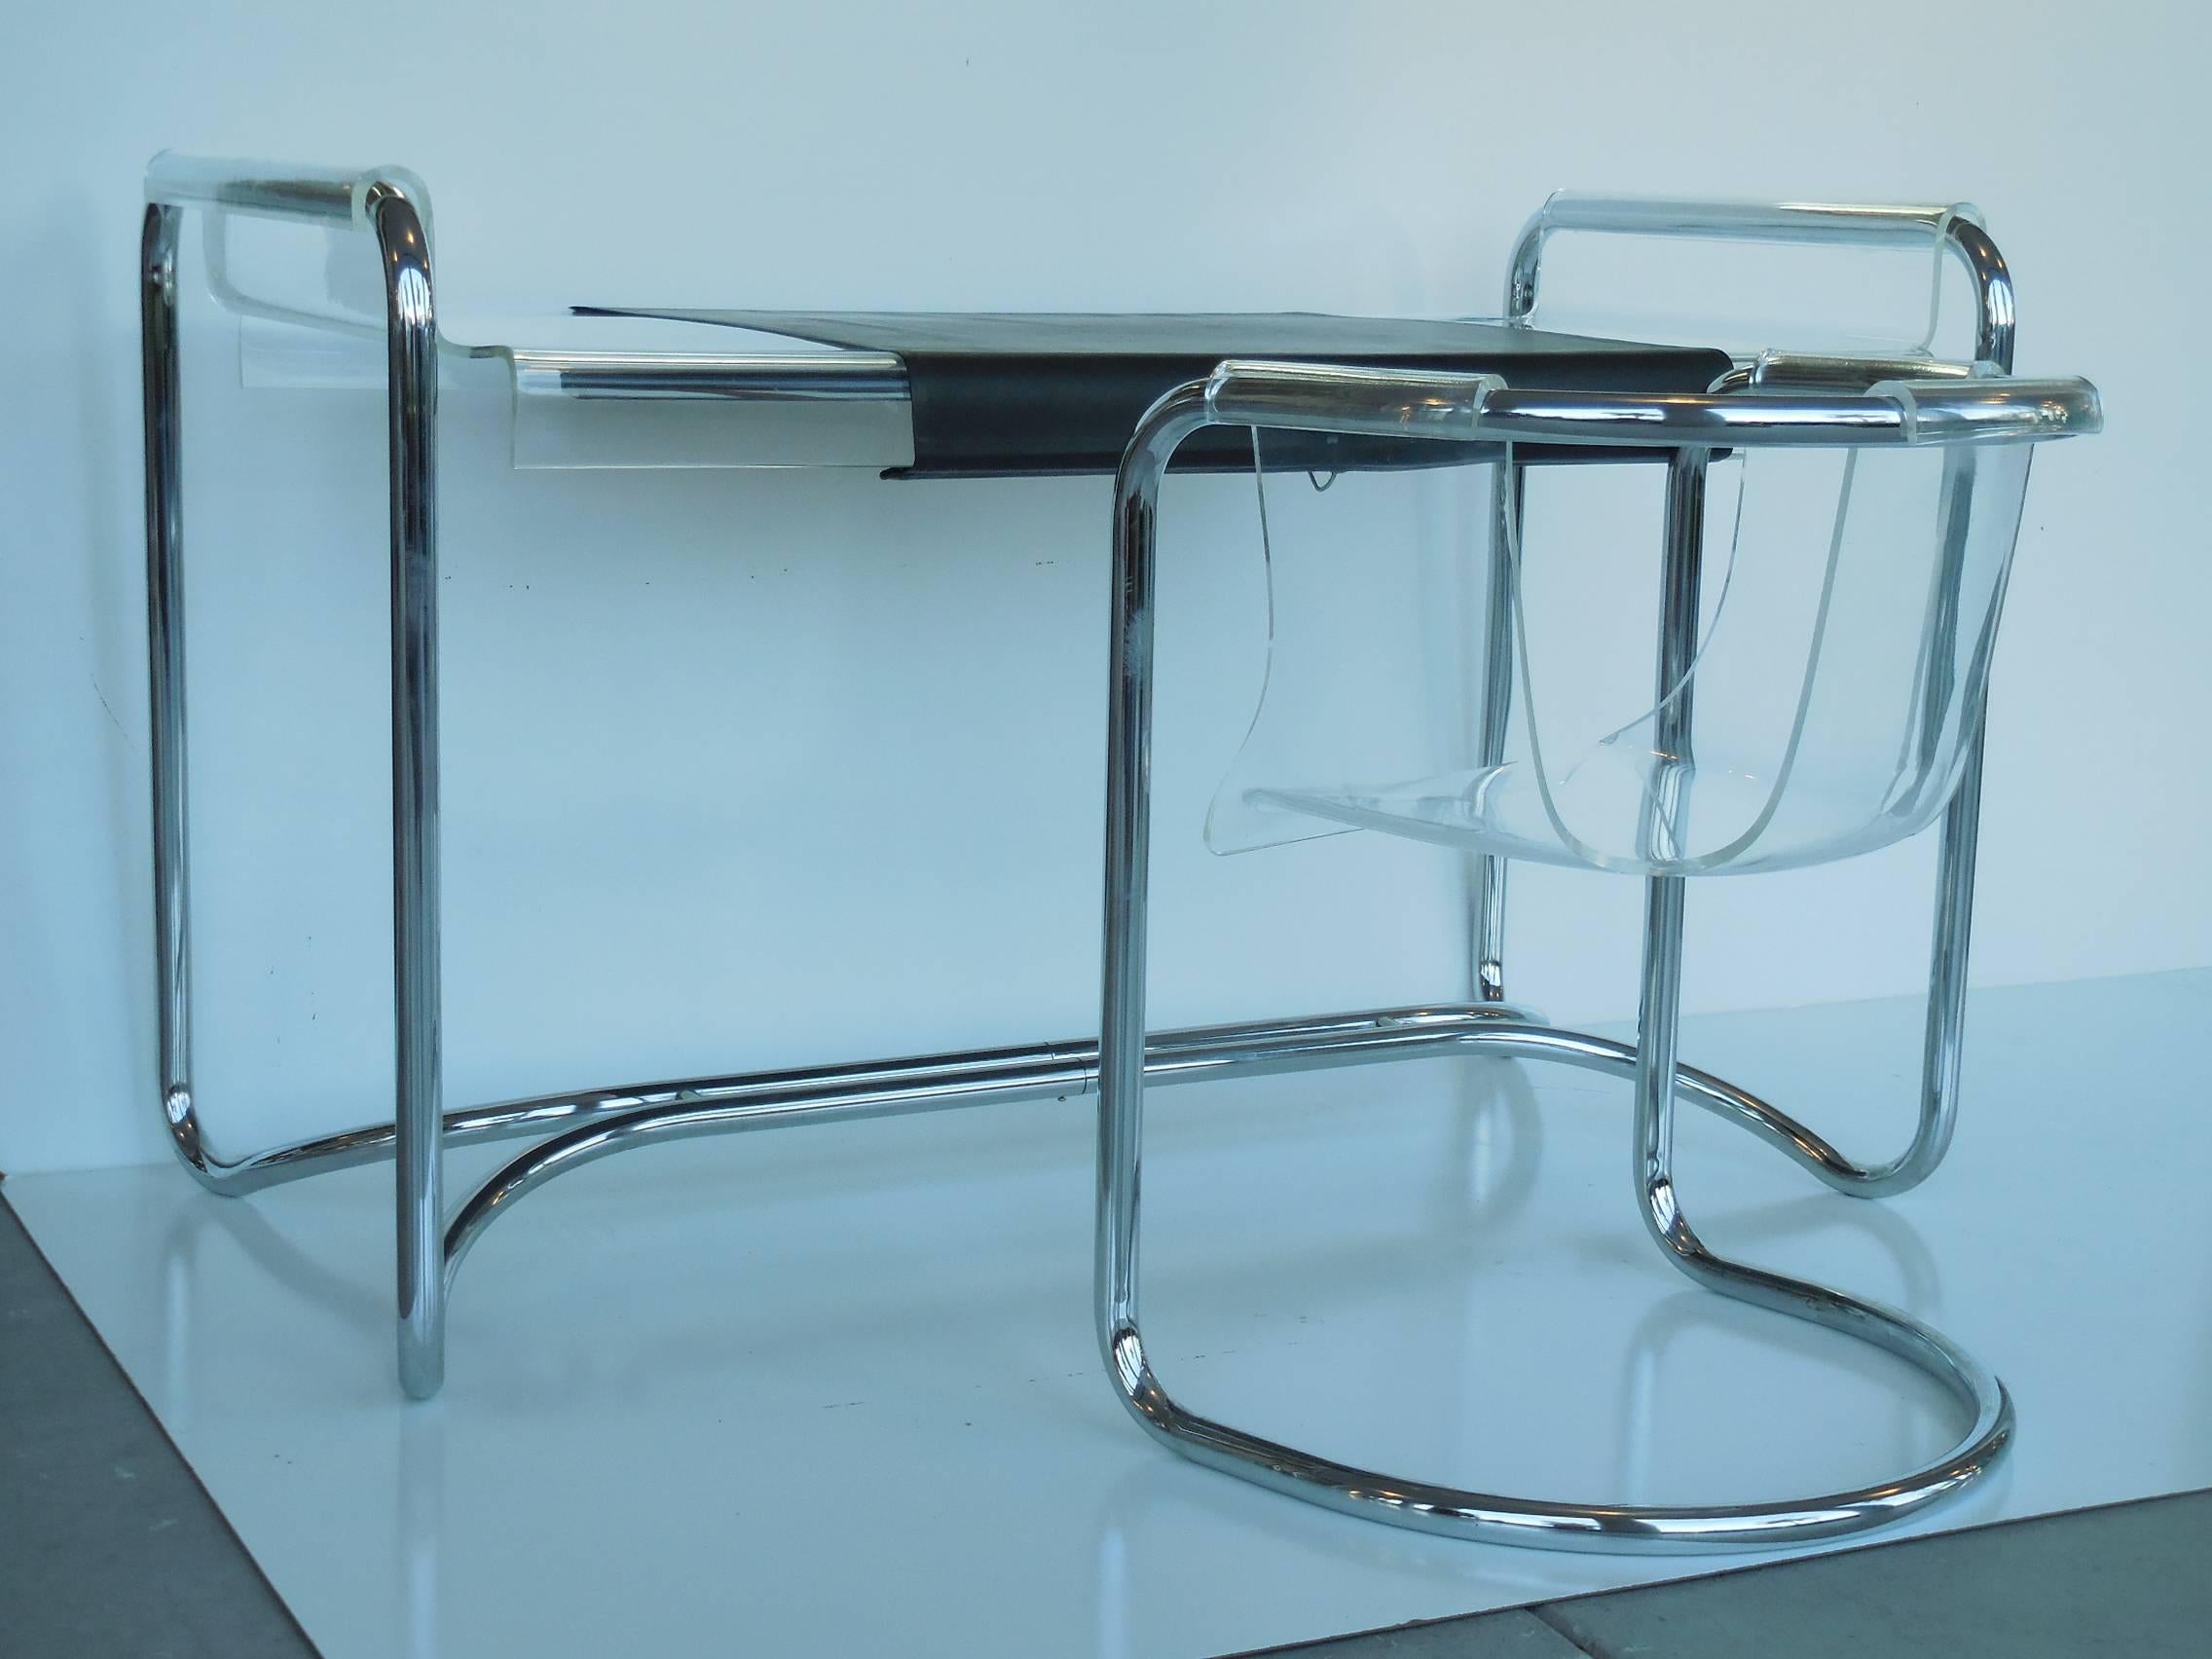 A super stylish desk. Chrome frame with a floating Lucite top. The top retains the original removable leather surface and pencil holders. Two chairs are included.